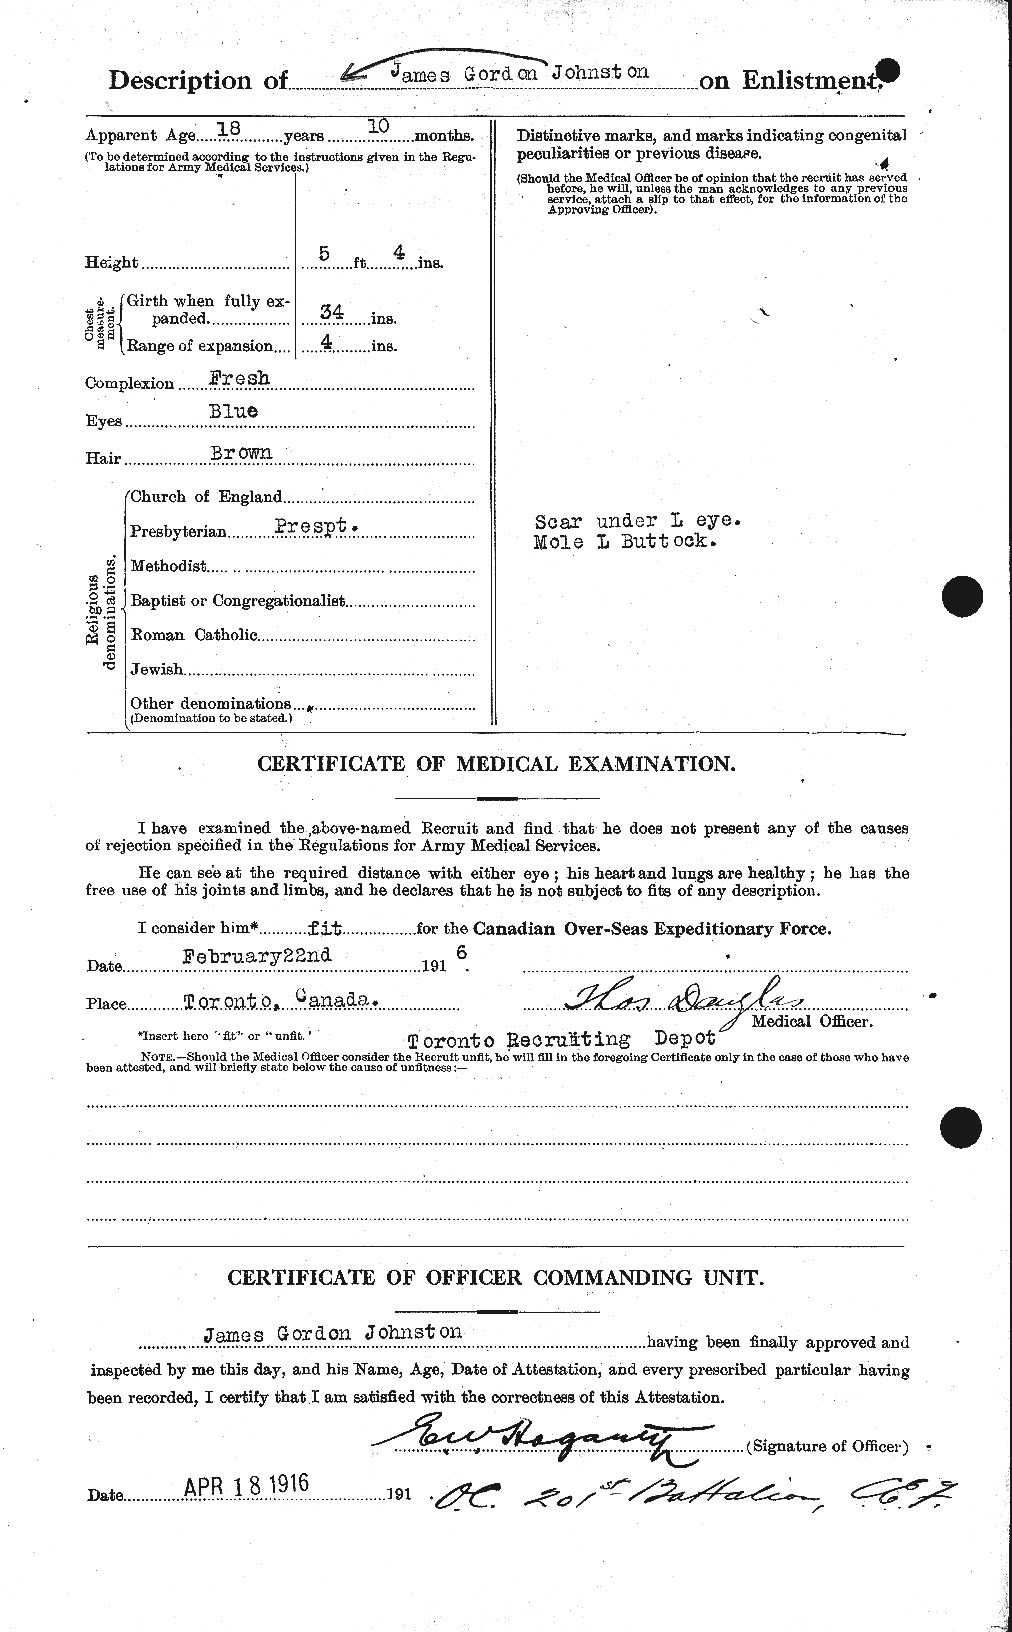 Personnel Records of the First World War - CEF 422734b